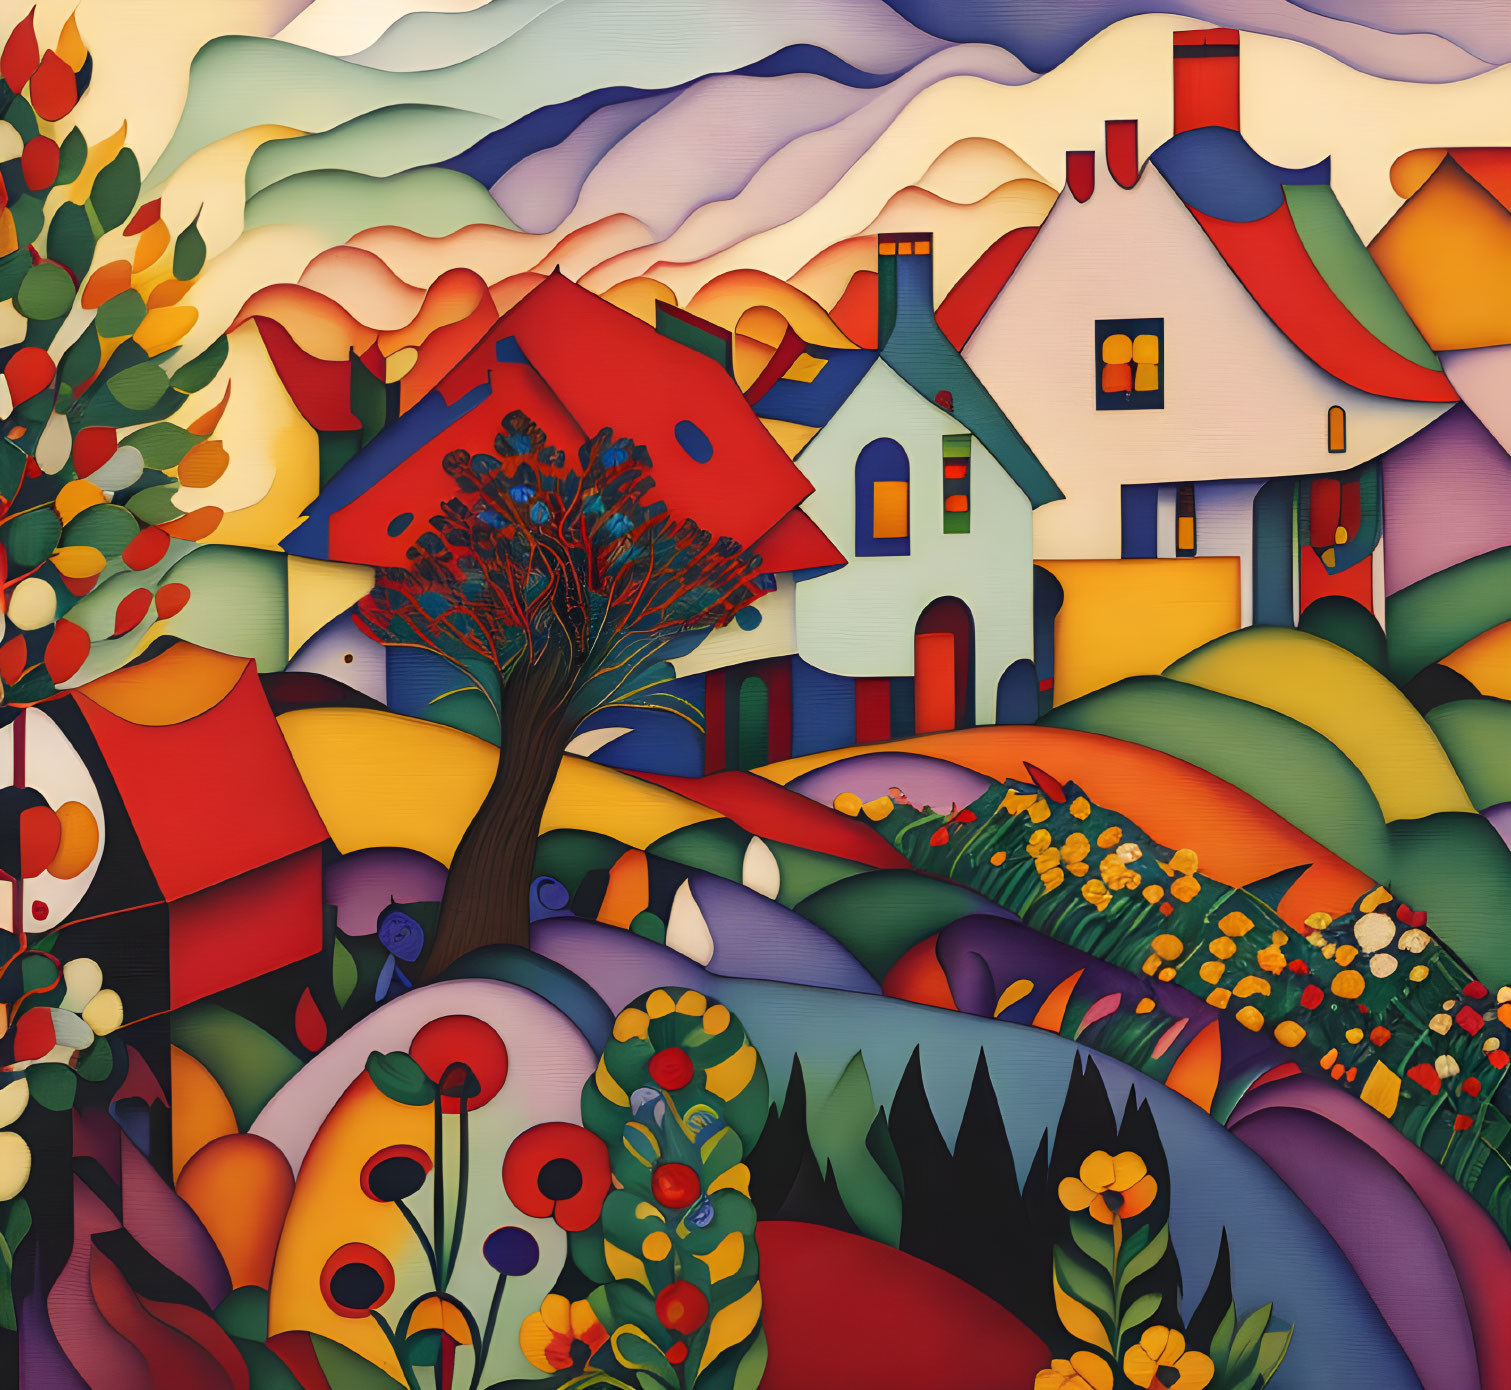 Vibrant stylized landscape with rolling hills and colorful houses